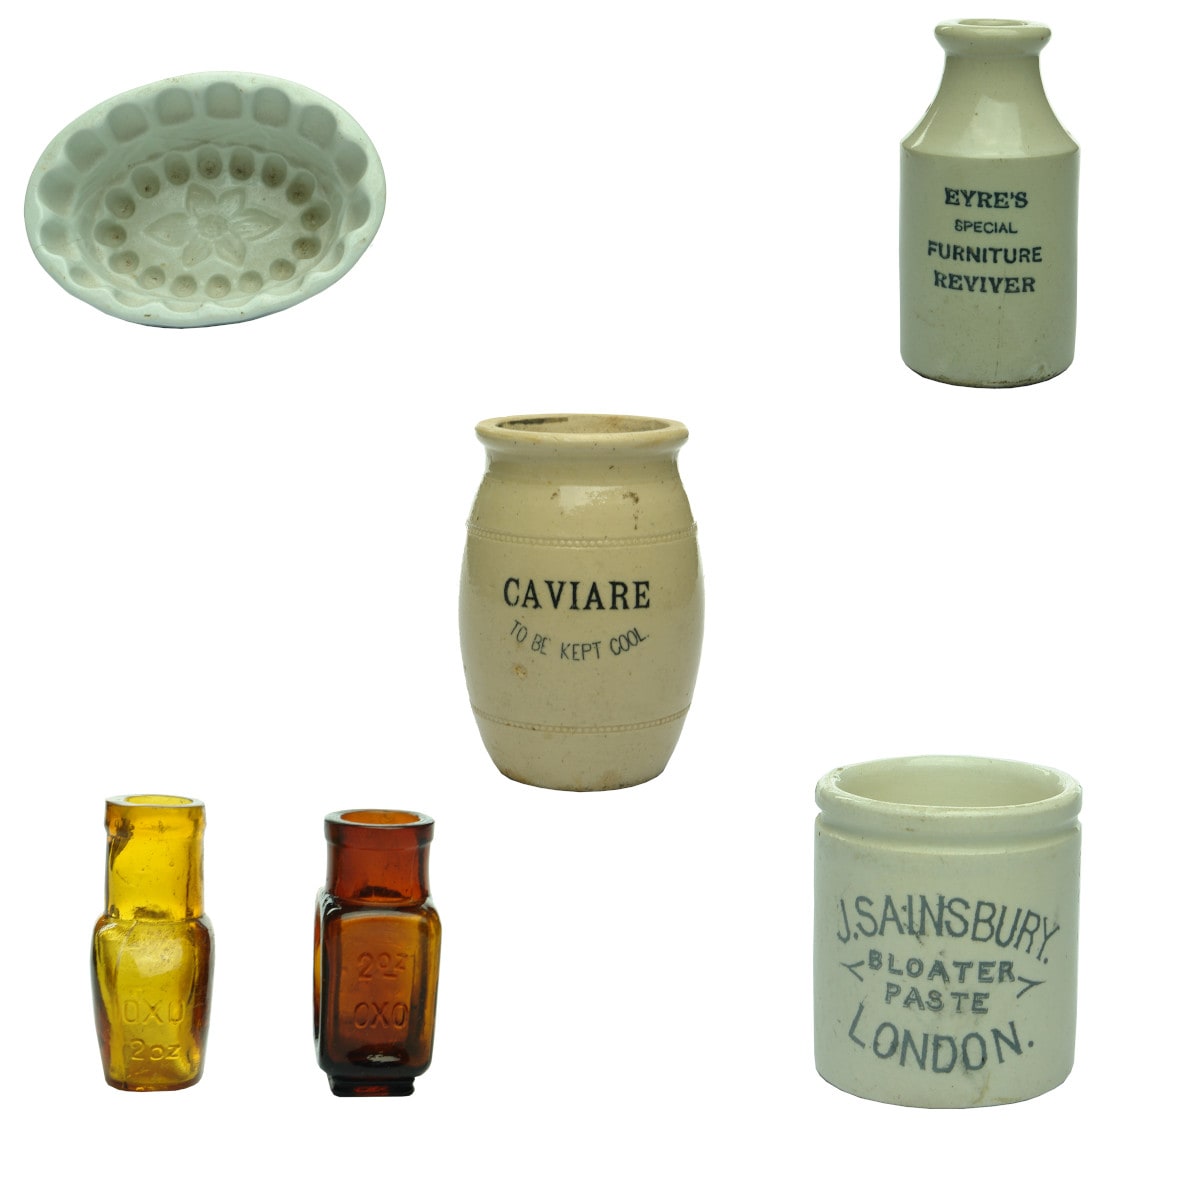 6 Household items/jars: Jelly Mould; Eyre's Reviver; Caviare; Pair of OXO jars; Sainsbury Bloater Paste.